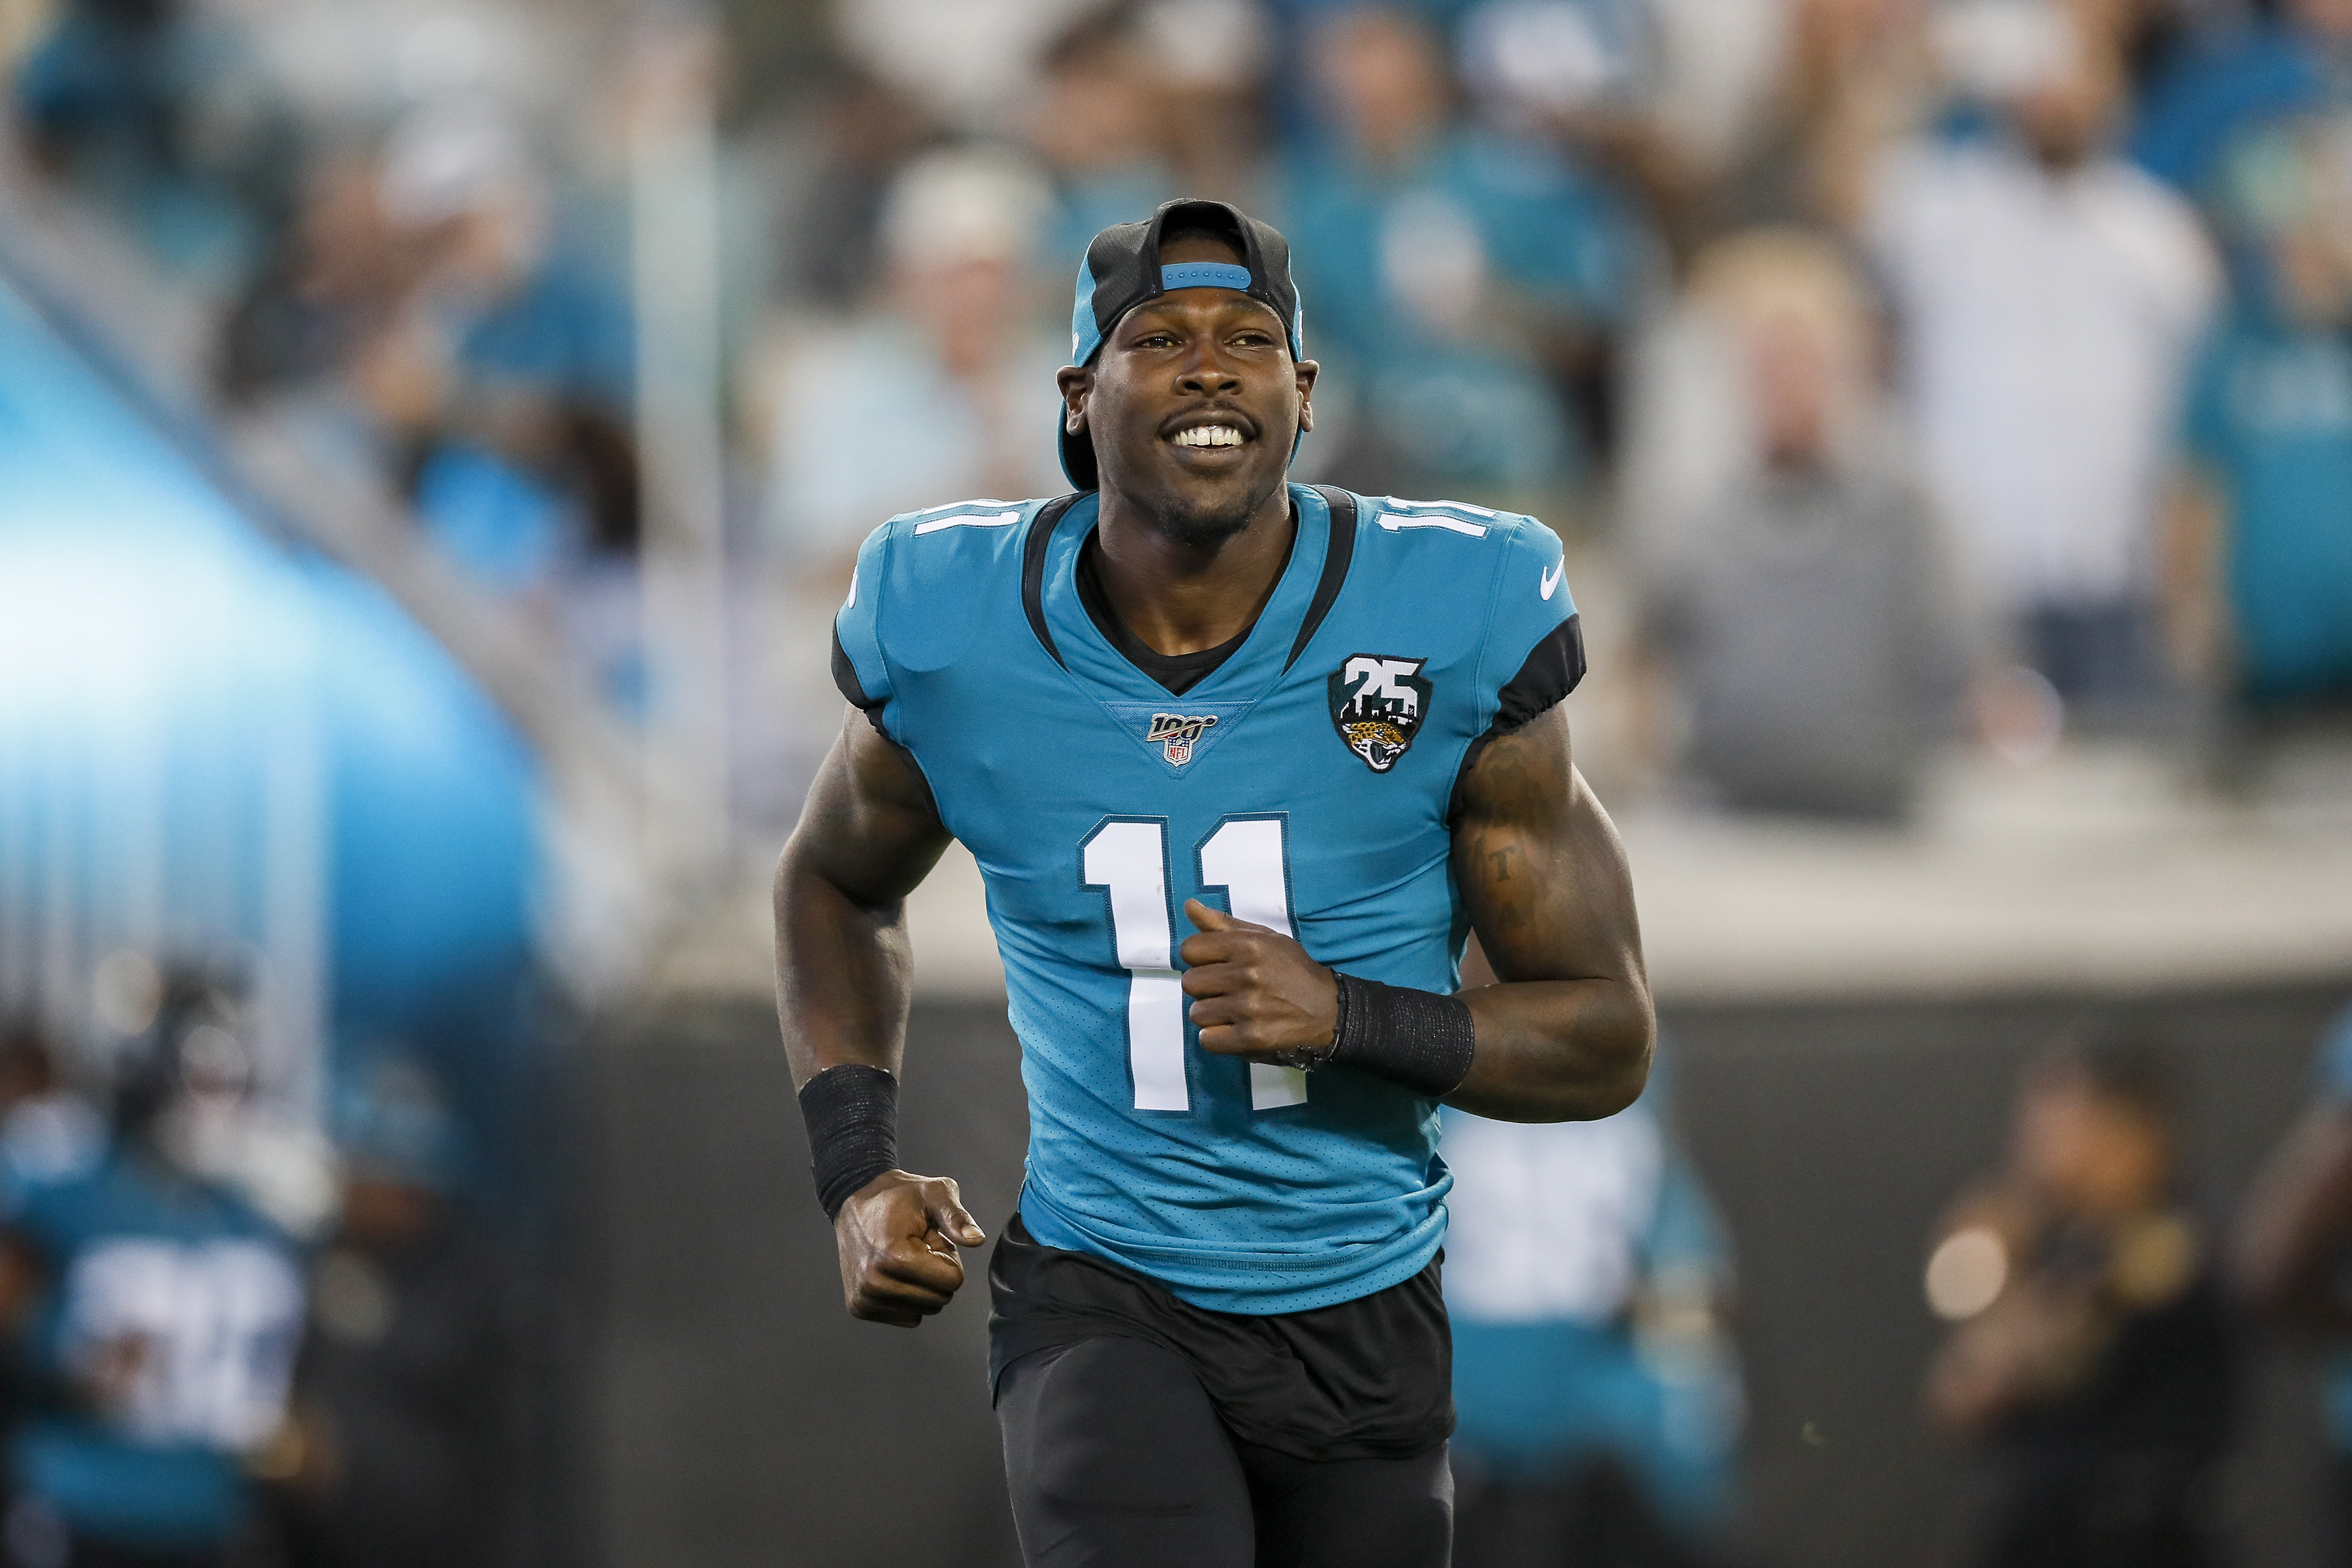 Patriots sign WR Marqise Lee to one-year deal, per report